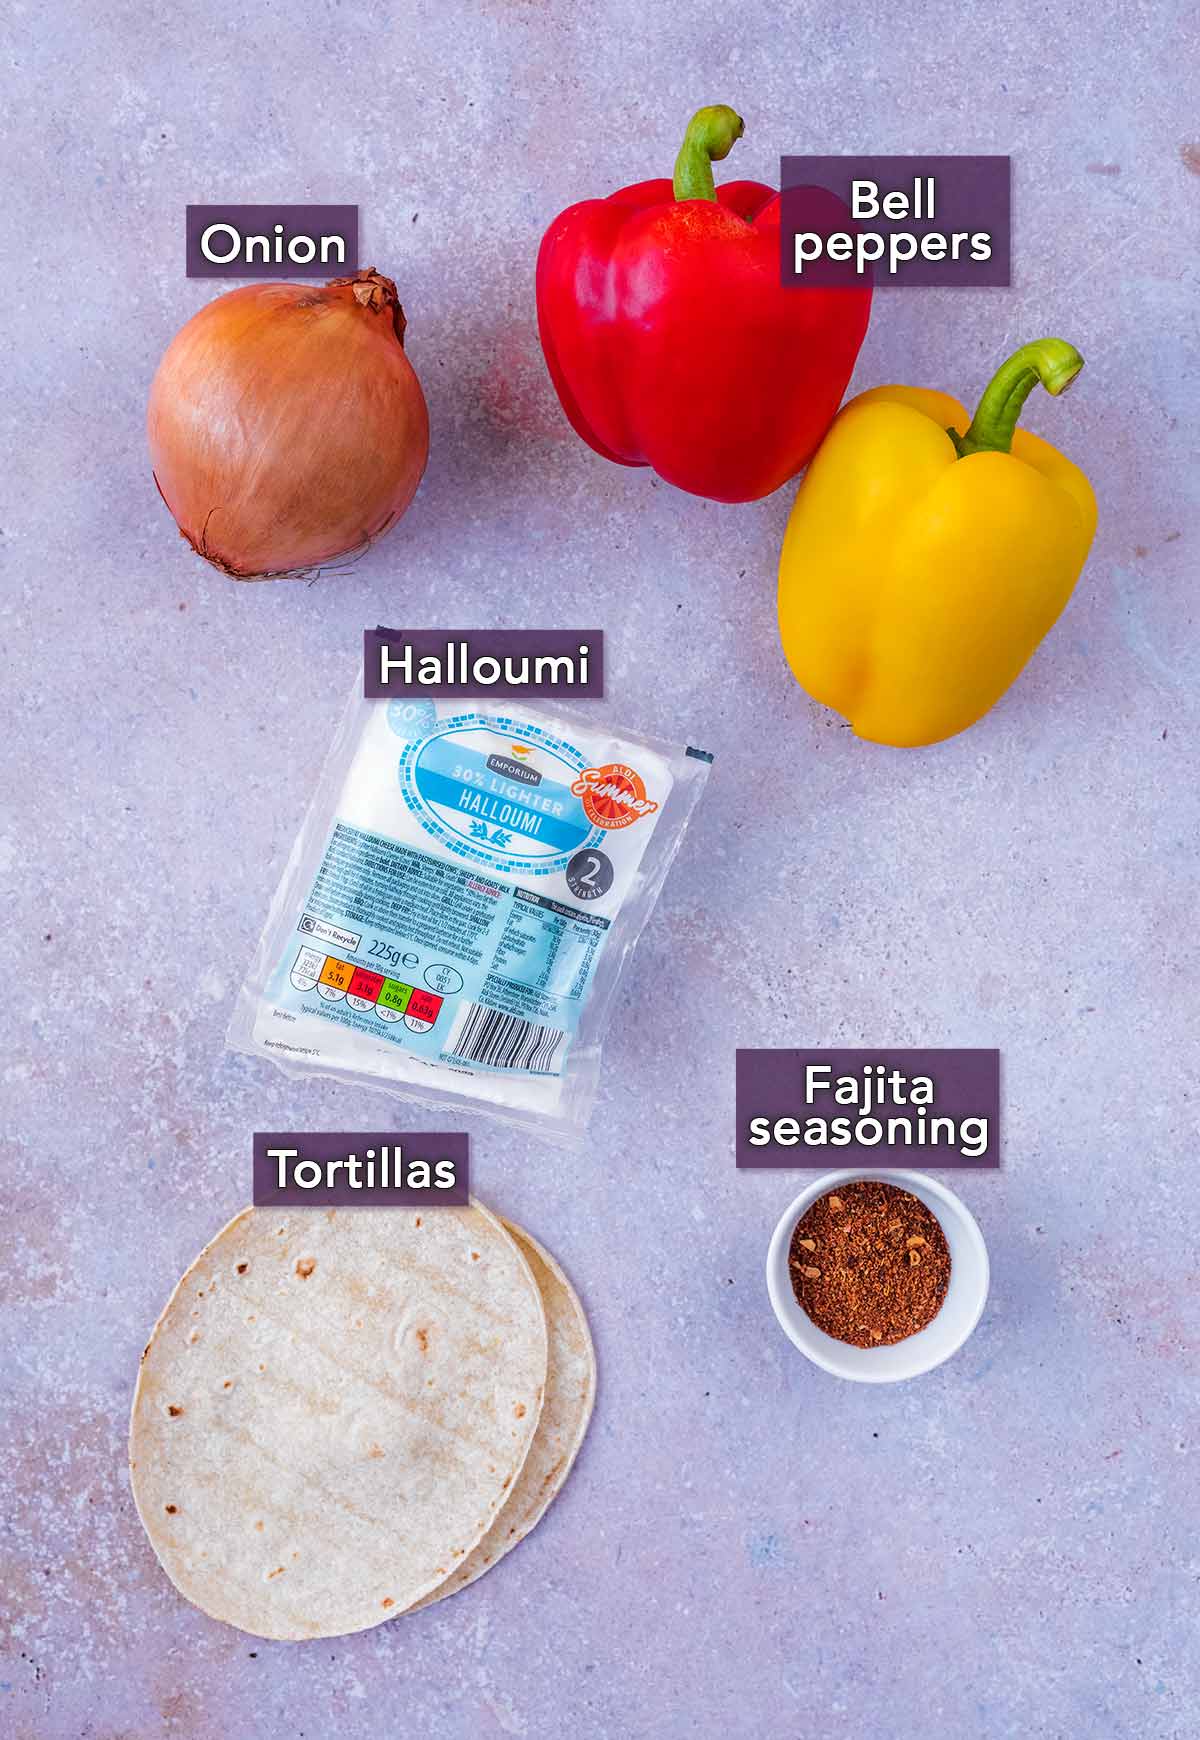 All the ingredients needed to make halloumi fajitas, with text overlay labels.